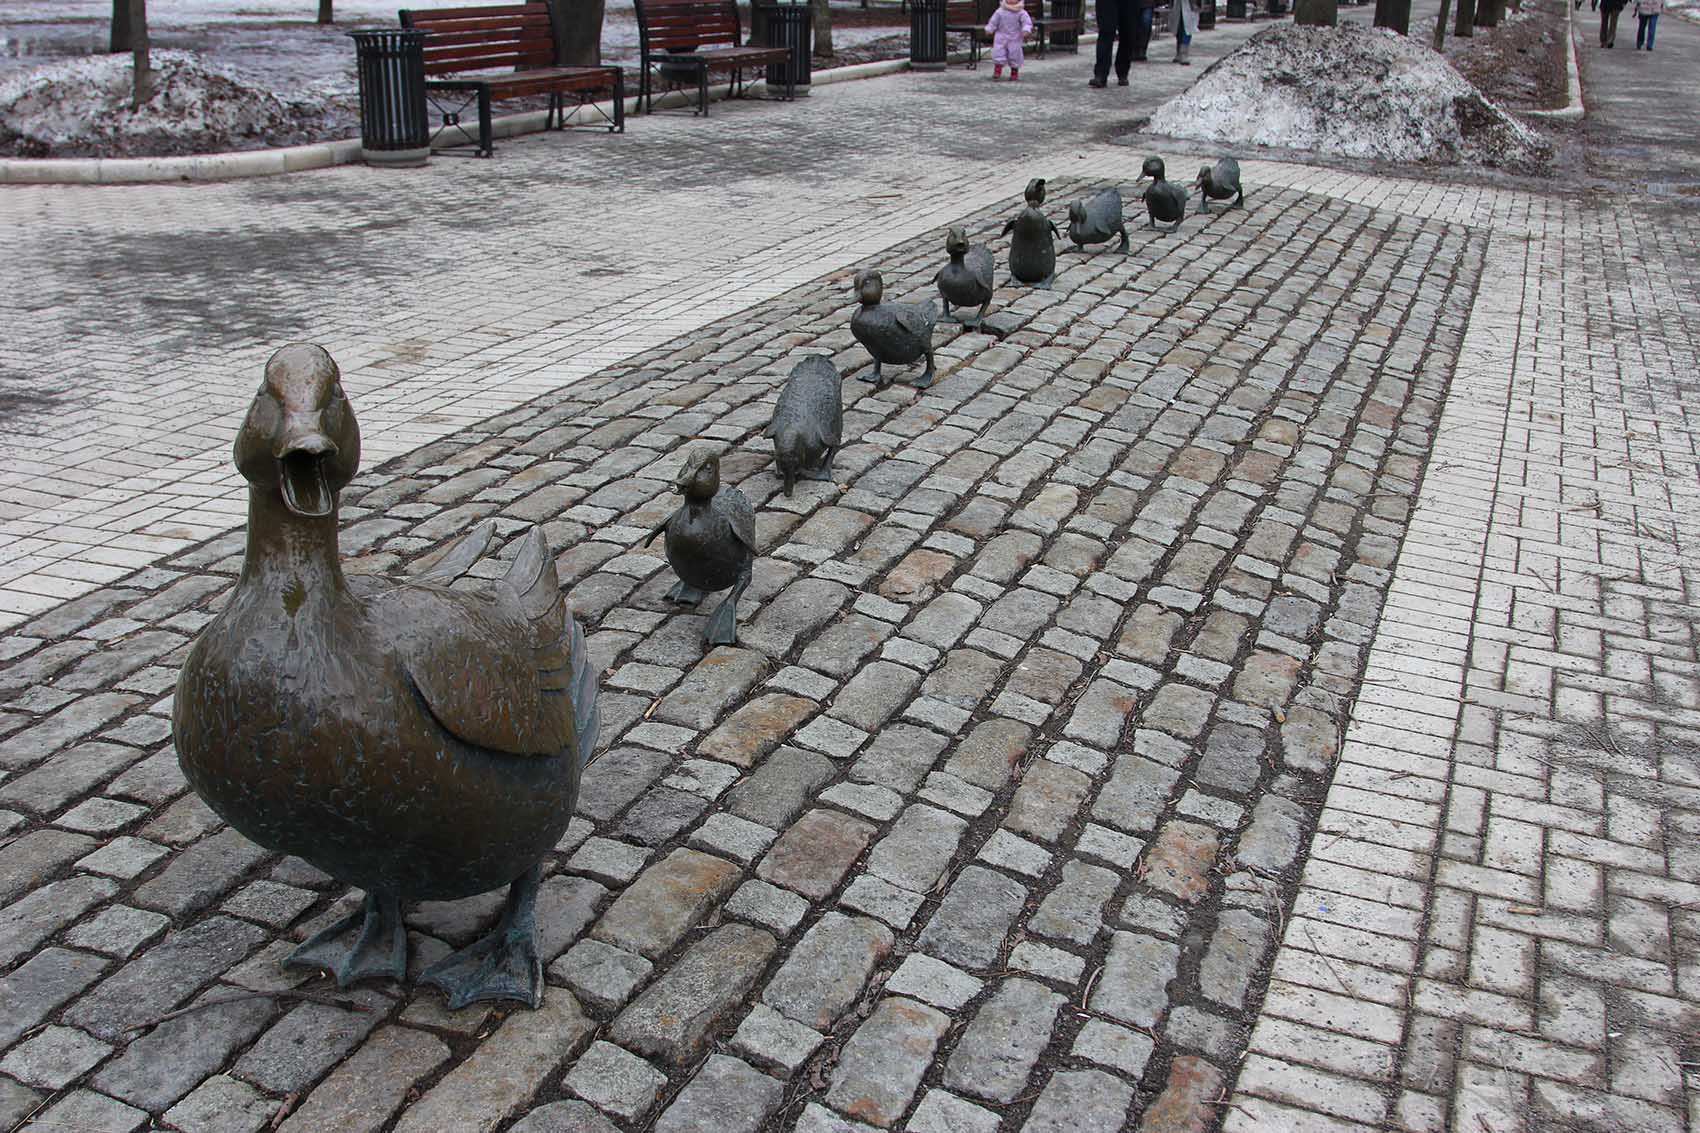 The installation of the &quot;Ducklings&quot; sculpture in Moscow coincided with the U.S. and Soviet Union signing a nuclear arms treaty known as the Strategic Arms Reduction Treaty, or START I. (Courtesy Dmitry Avdoshin)